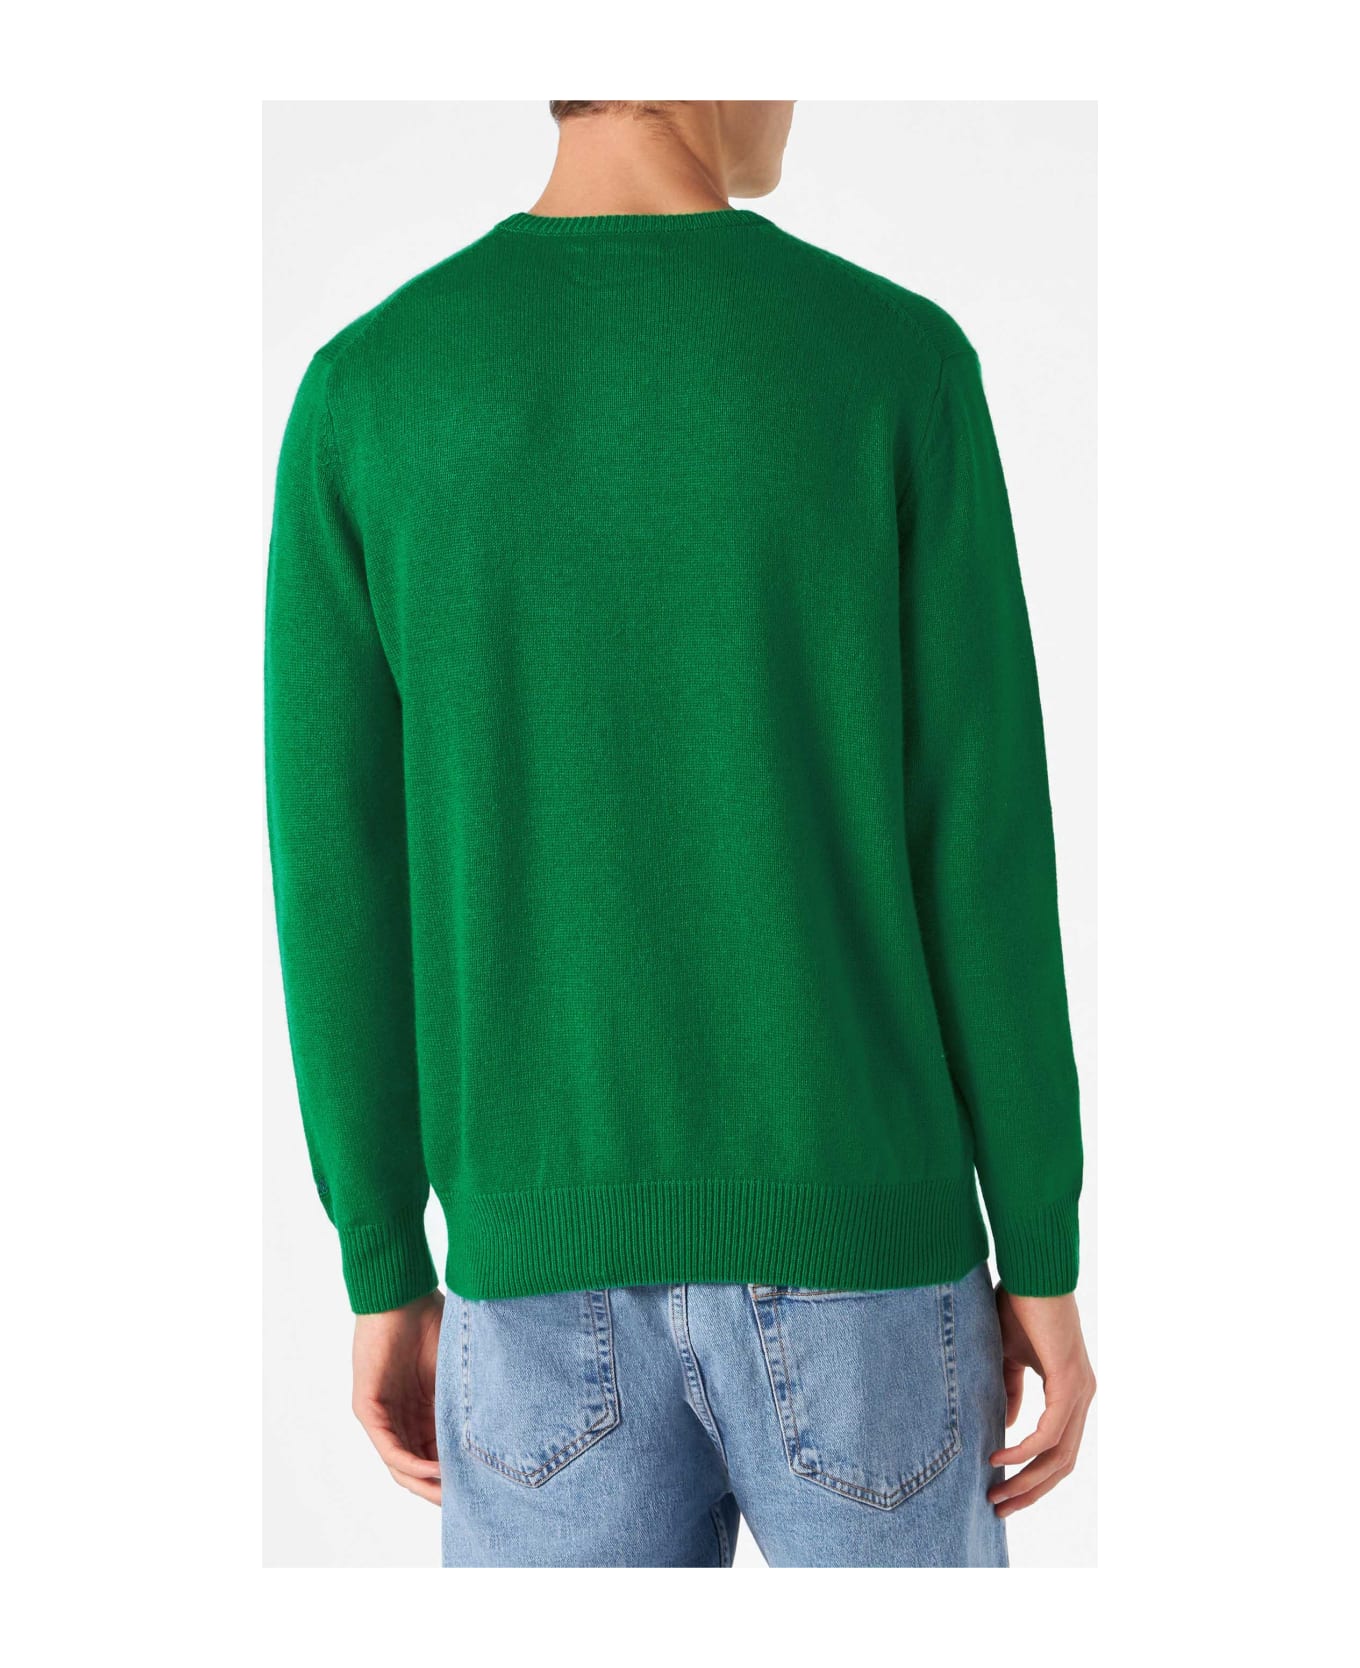 MC2 Saint Barth Man Green Sweater With Tequila Solves Everything Embroidery - GREEN